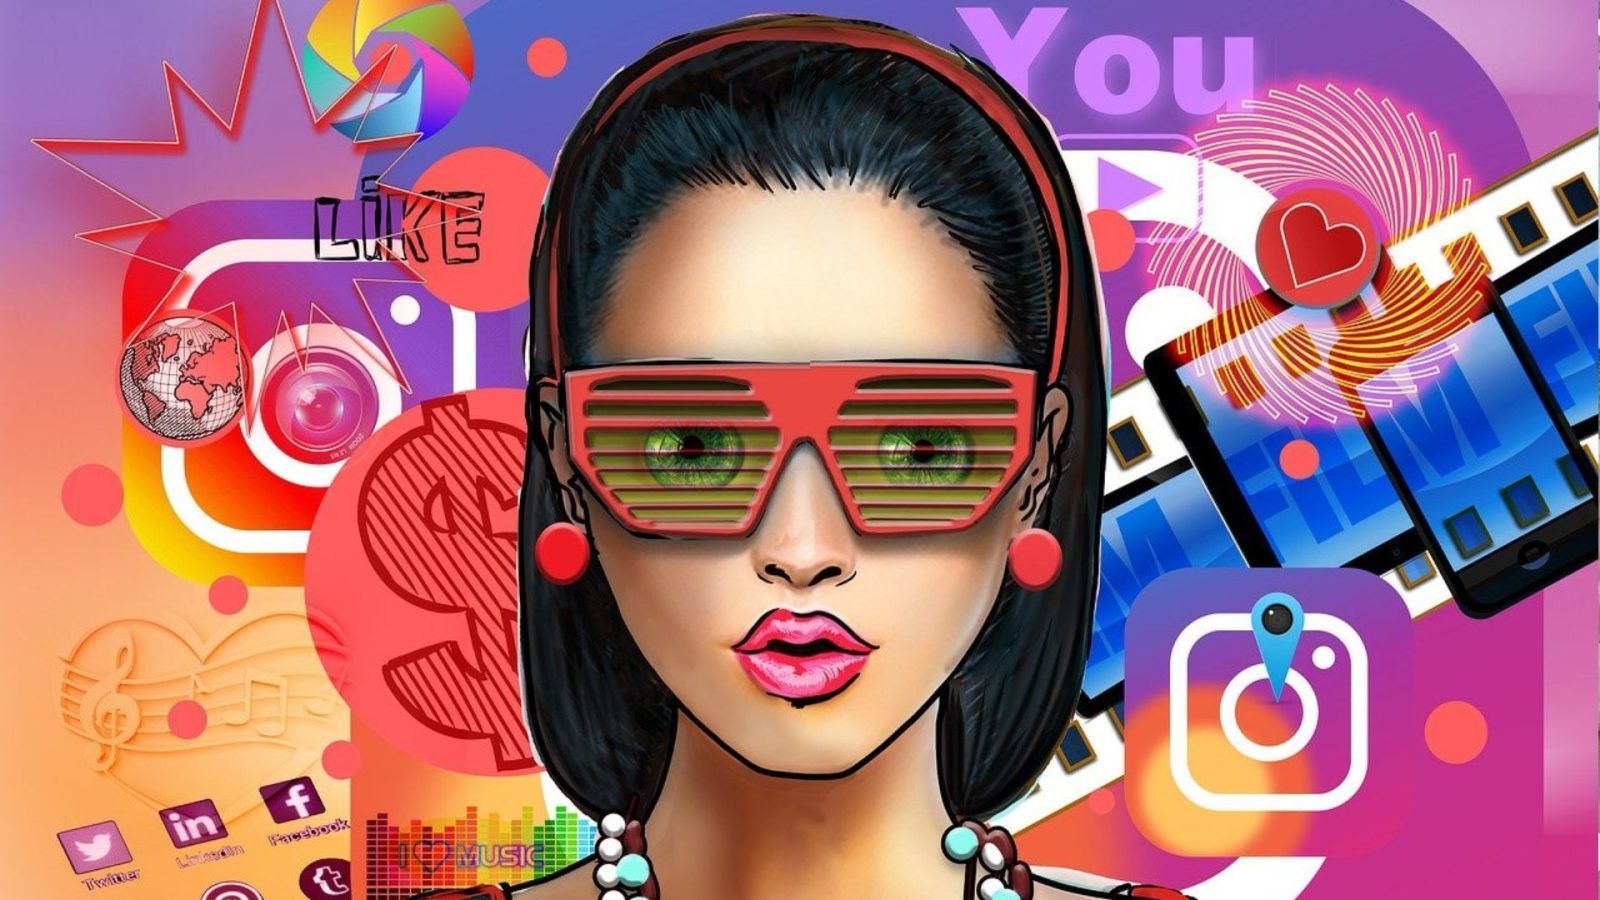 Link Instagram to Facebook: The 2023 Step-by-Step Guide